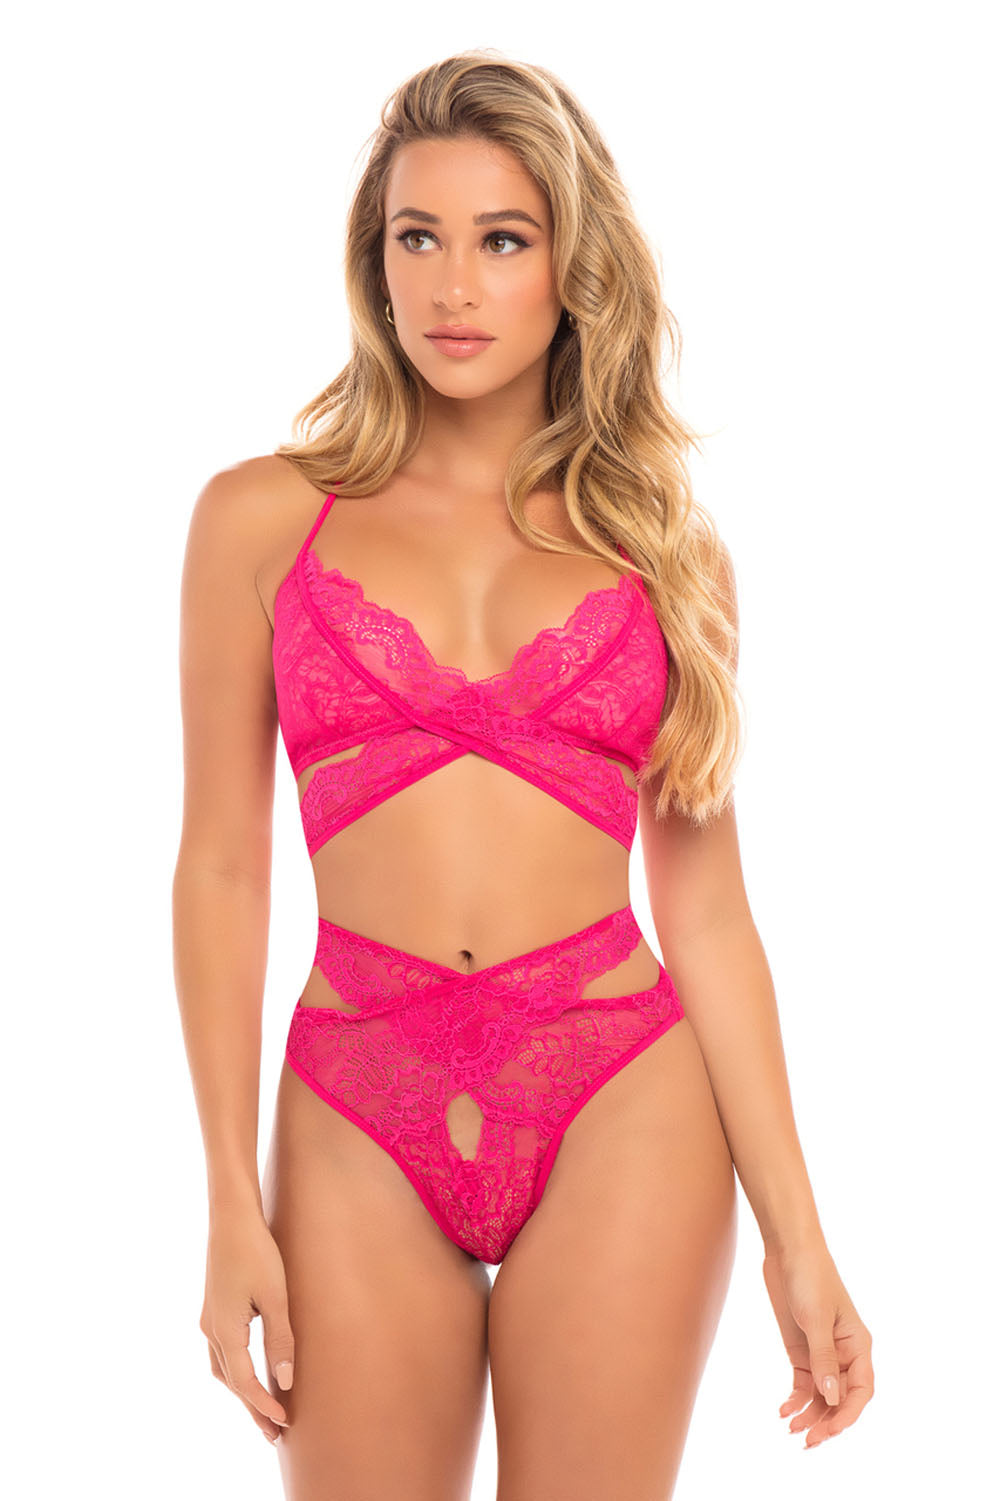 Cut Out Galloon Lace Bra Set - Bright Rose - S/m OH-40-11258-BRSSM